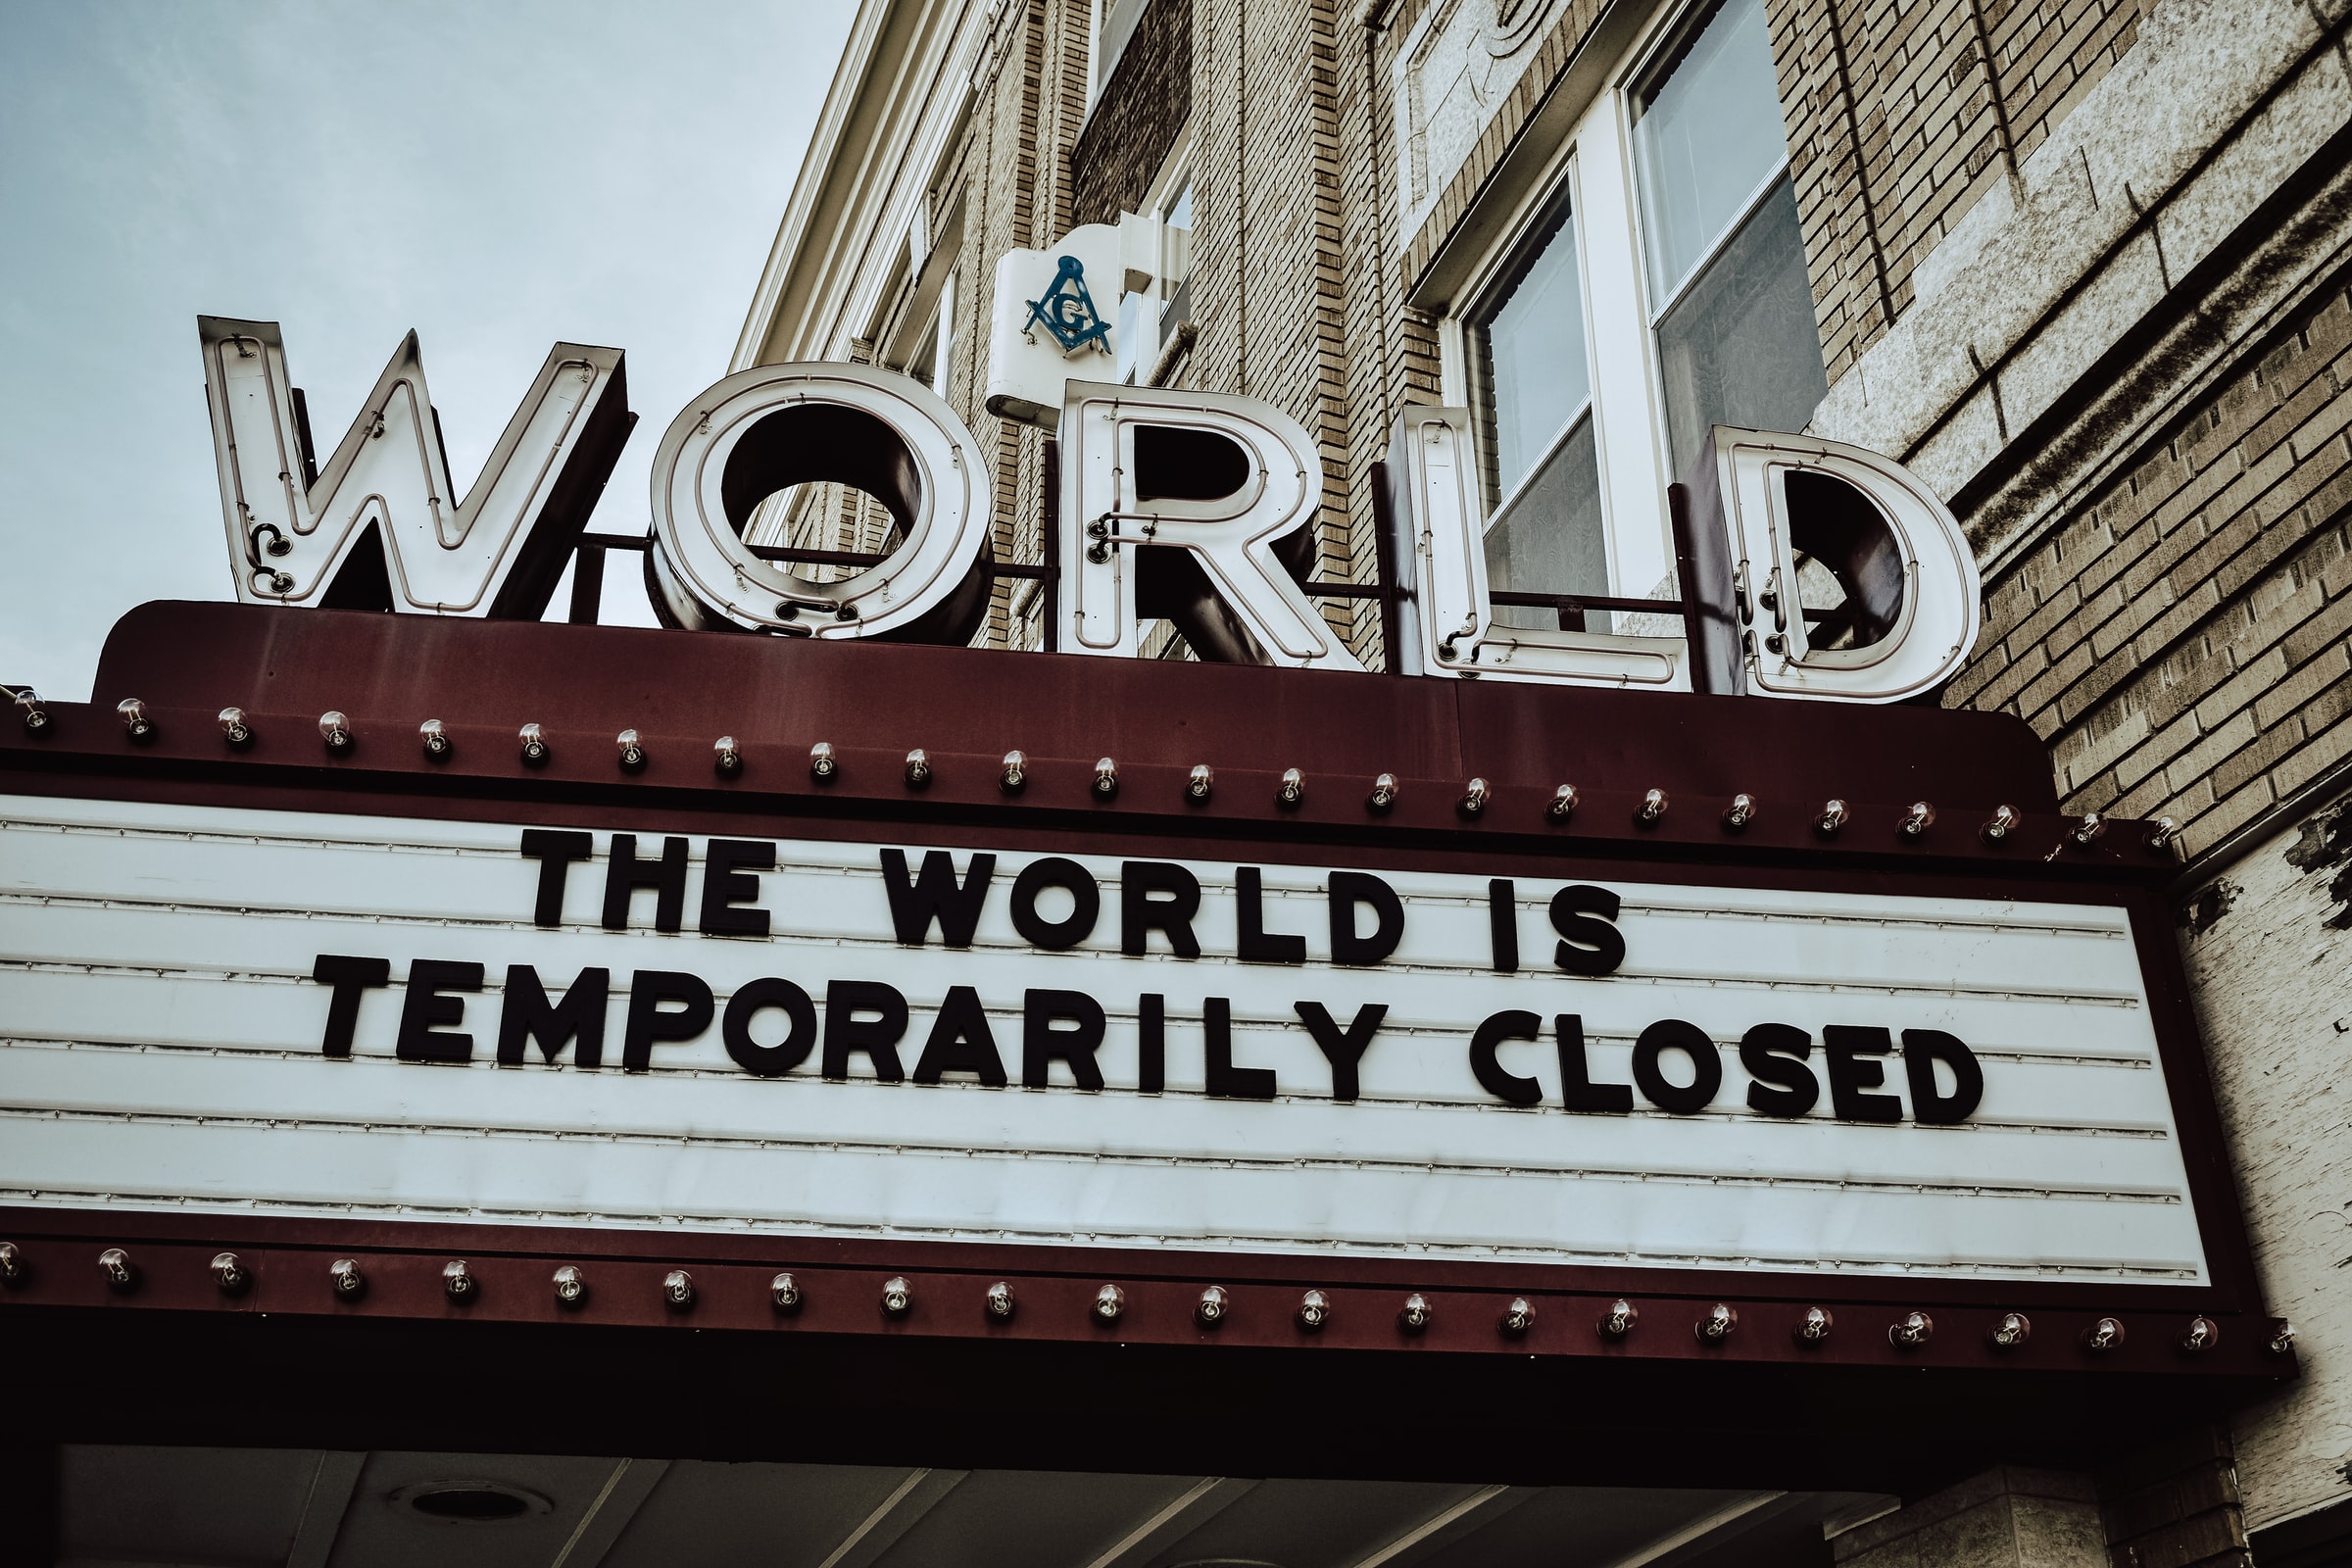 World marque sign that says "The world is temporarily closed" disrupting your supplier network